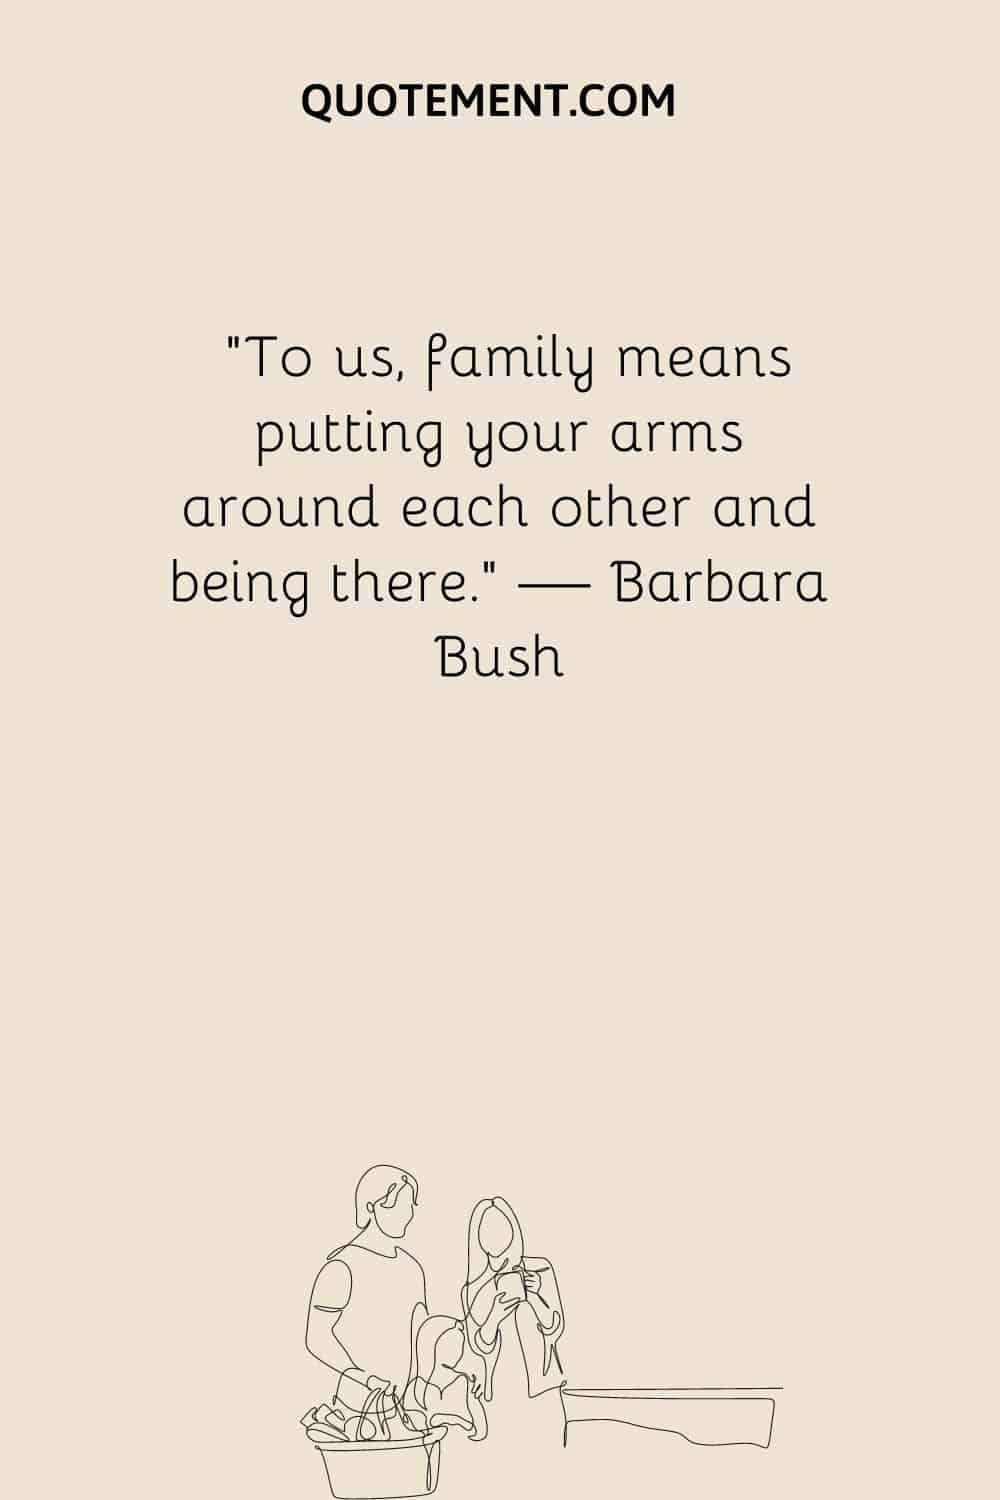 To us, family means putting your arms around each other and being there